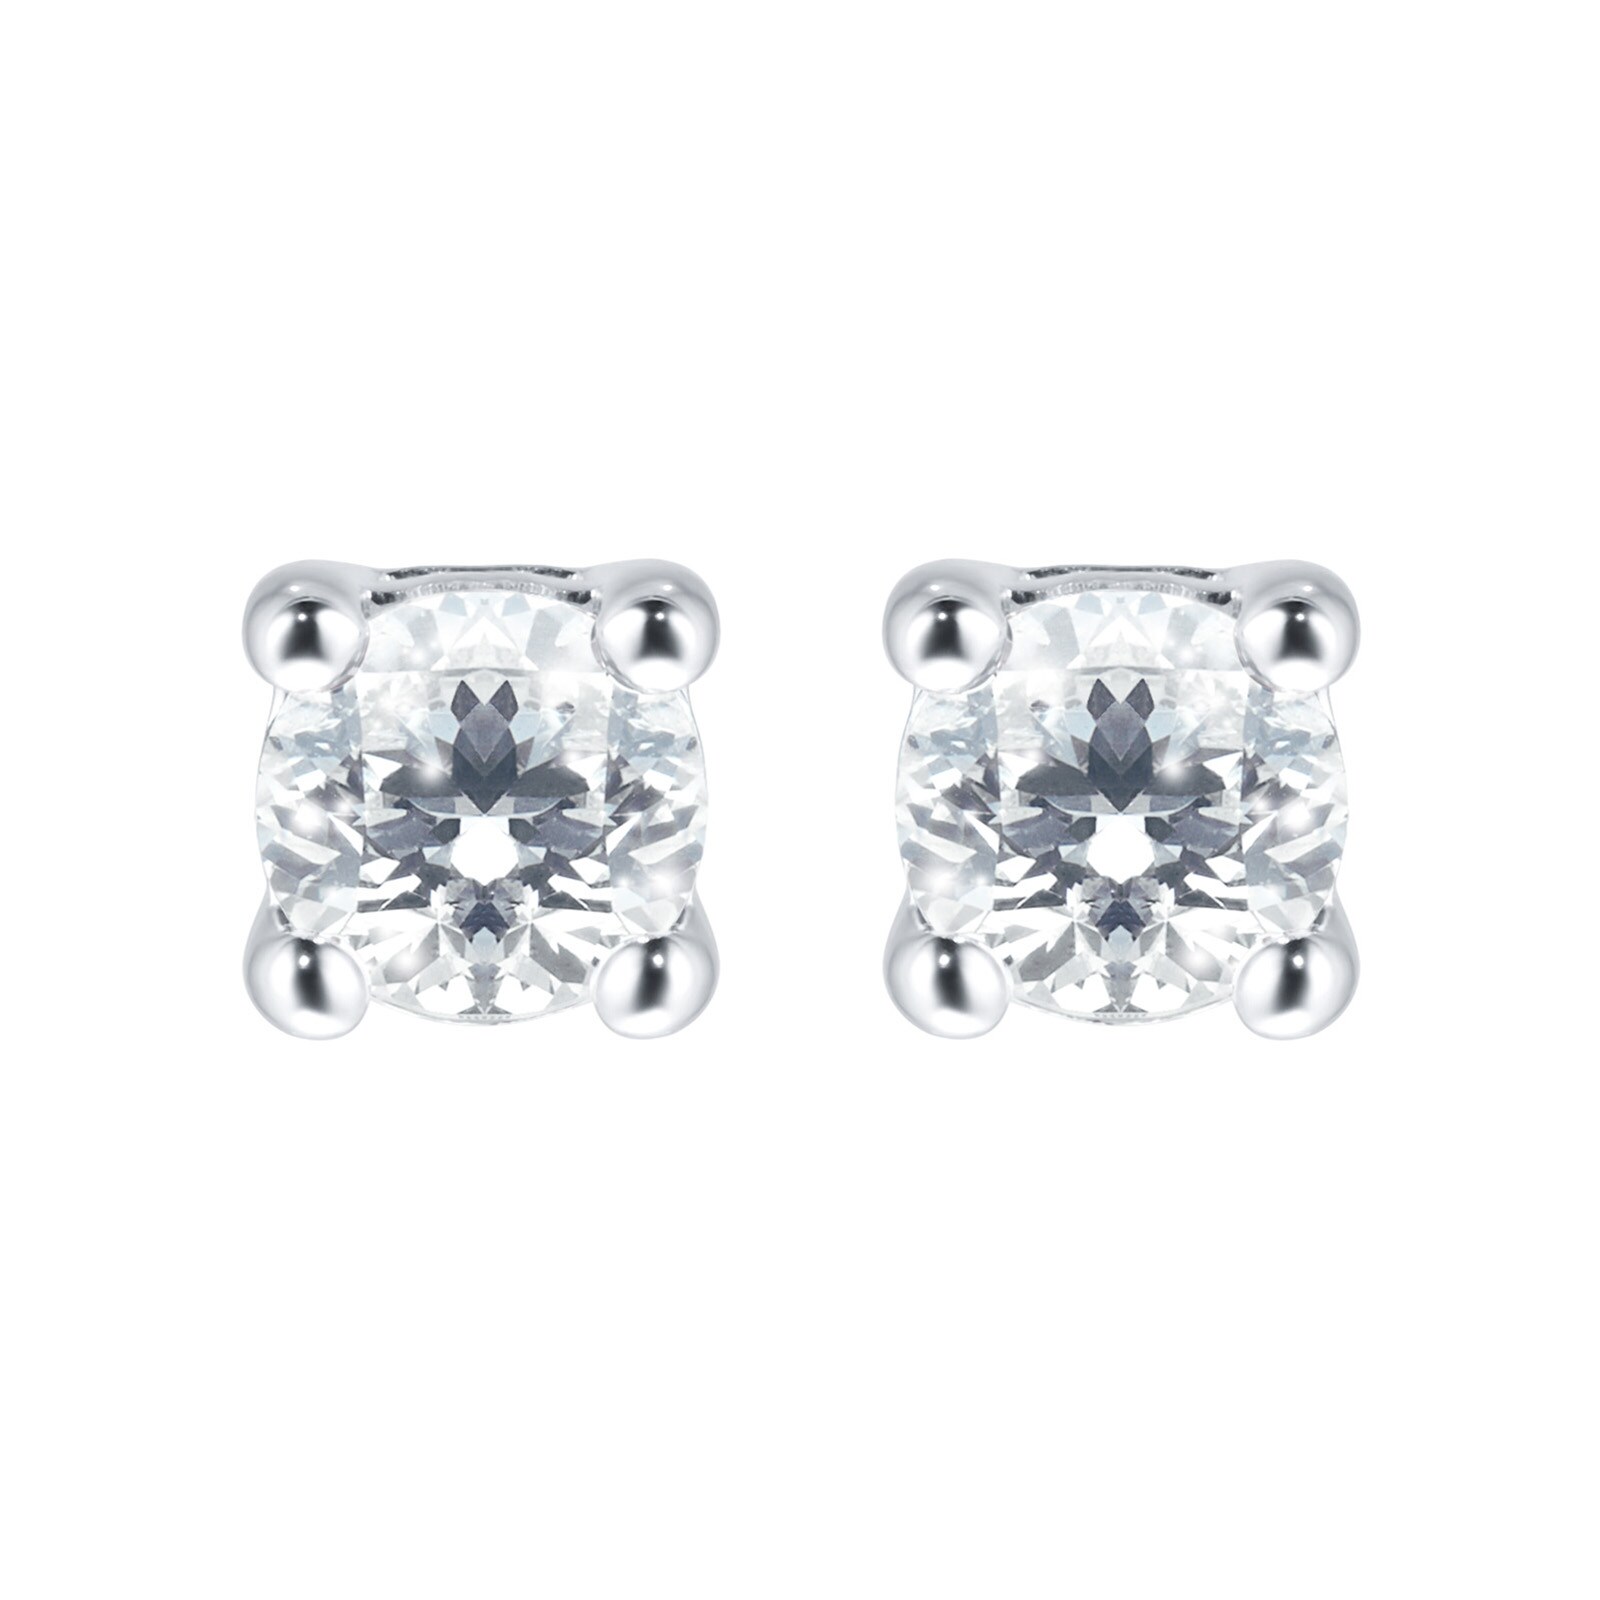 18ct White Gold 0.25cttw Goldsmiths Brightest Diamond Solitaire Stud Earrings